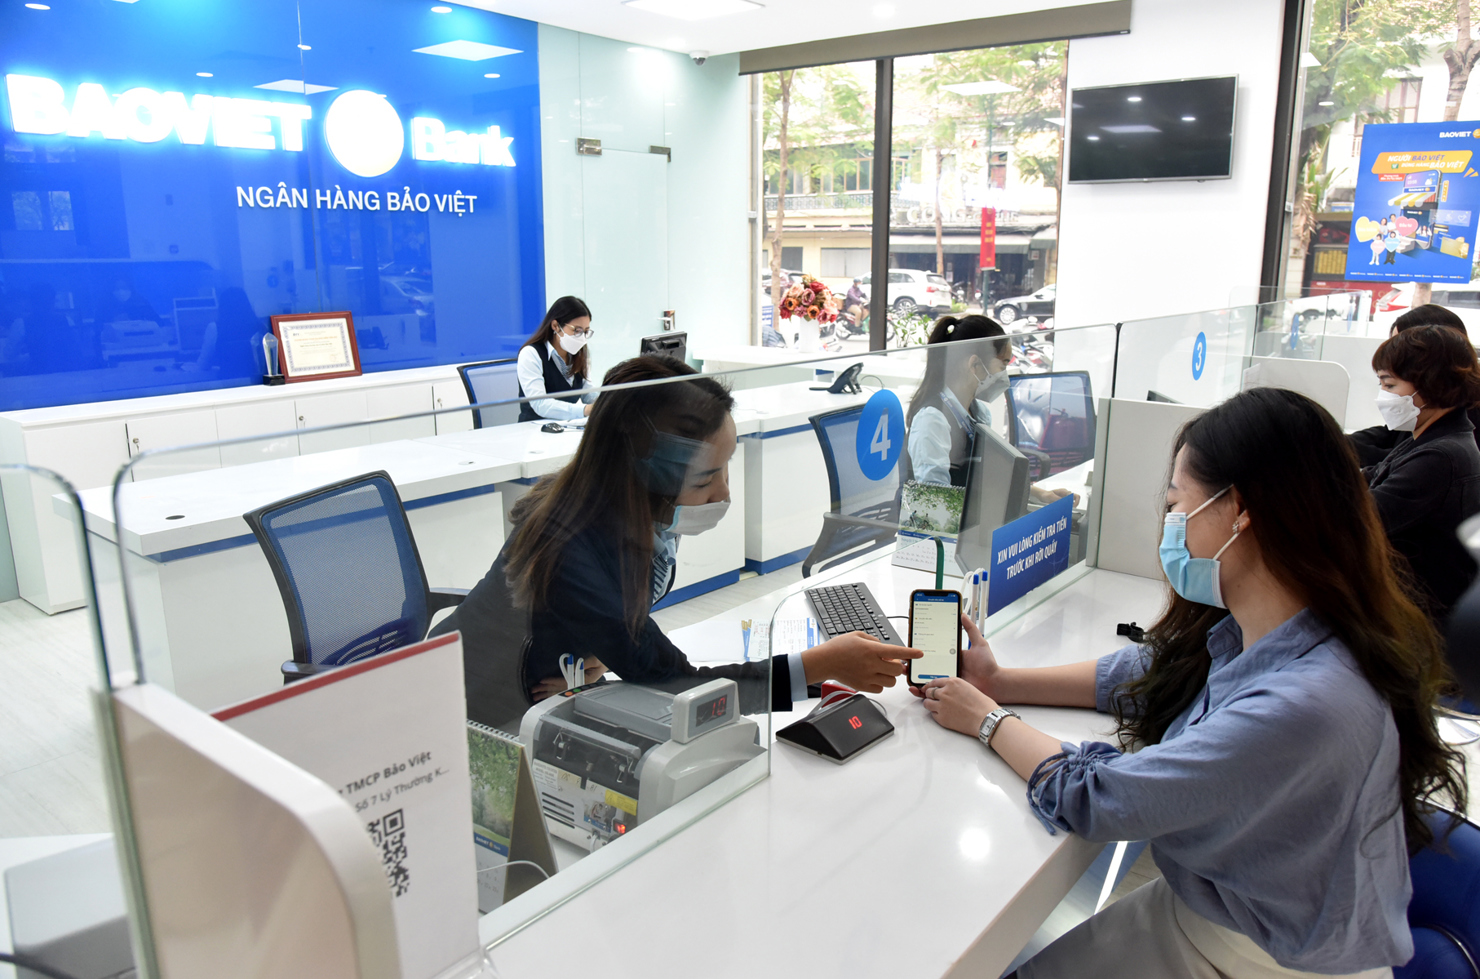 Kh&aacute;ch h&agrave;ng giao dịch tại BAOVIET Bank.